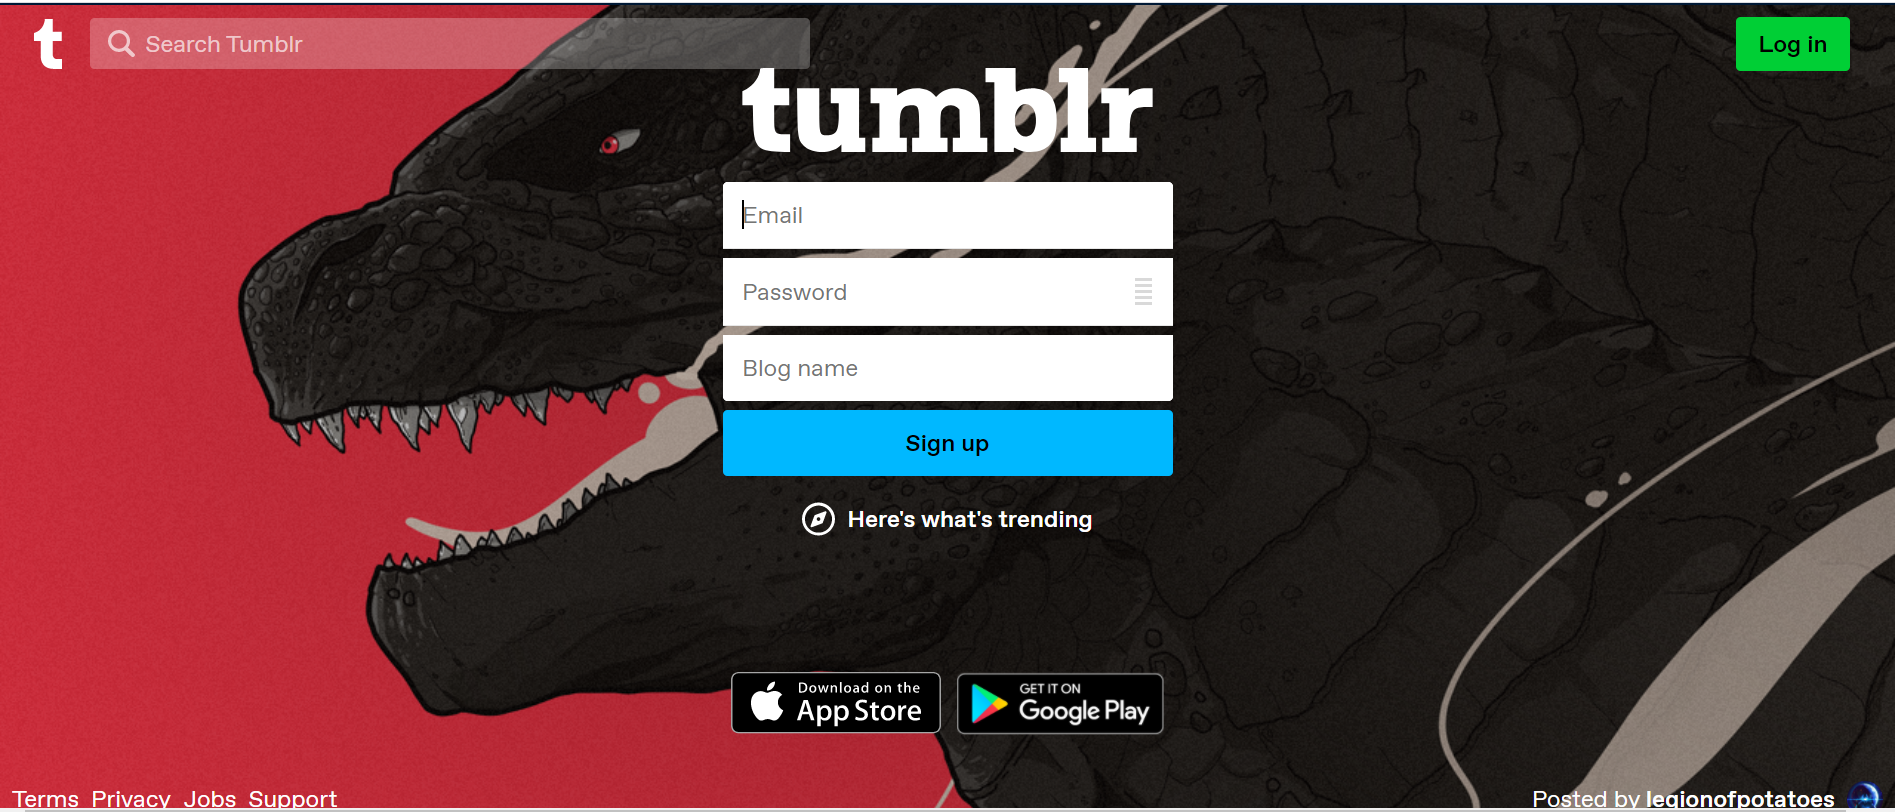 Your Tumblr username is through which your handle will be identified on the platform.